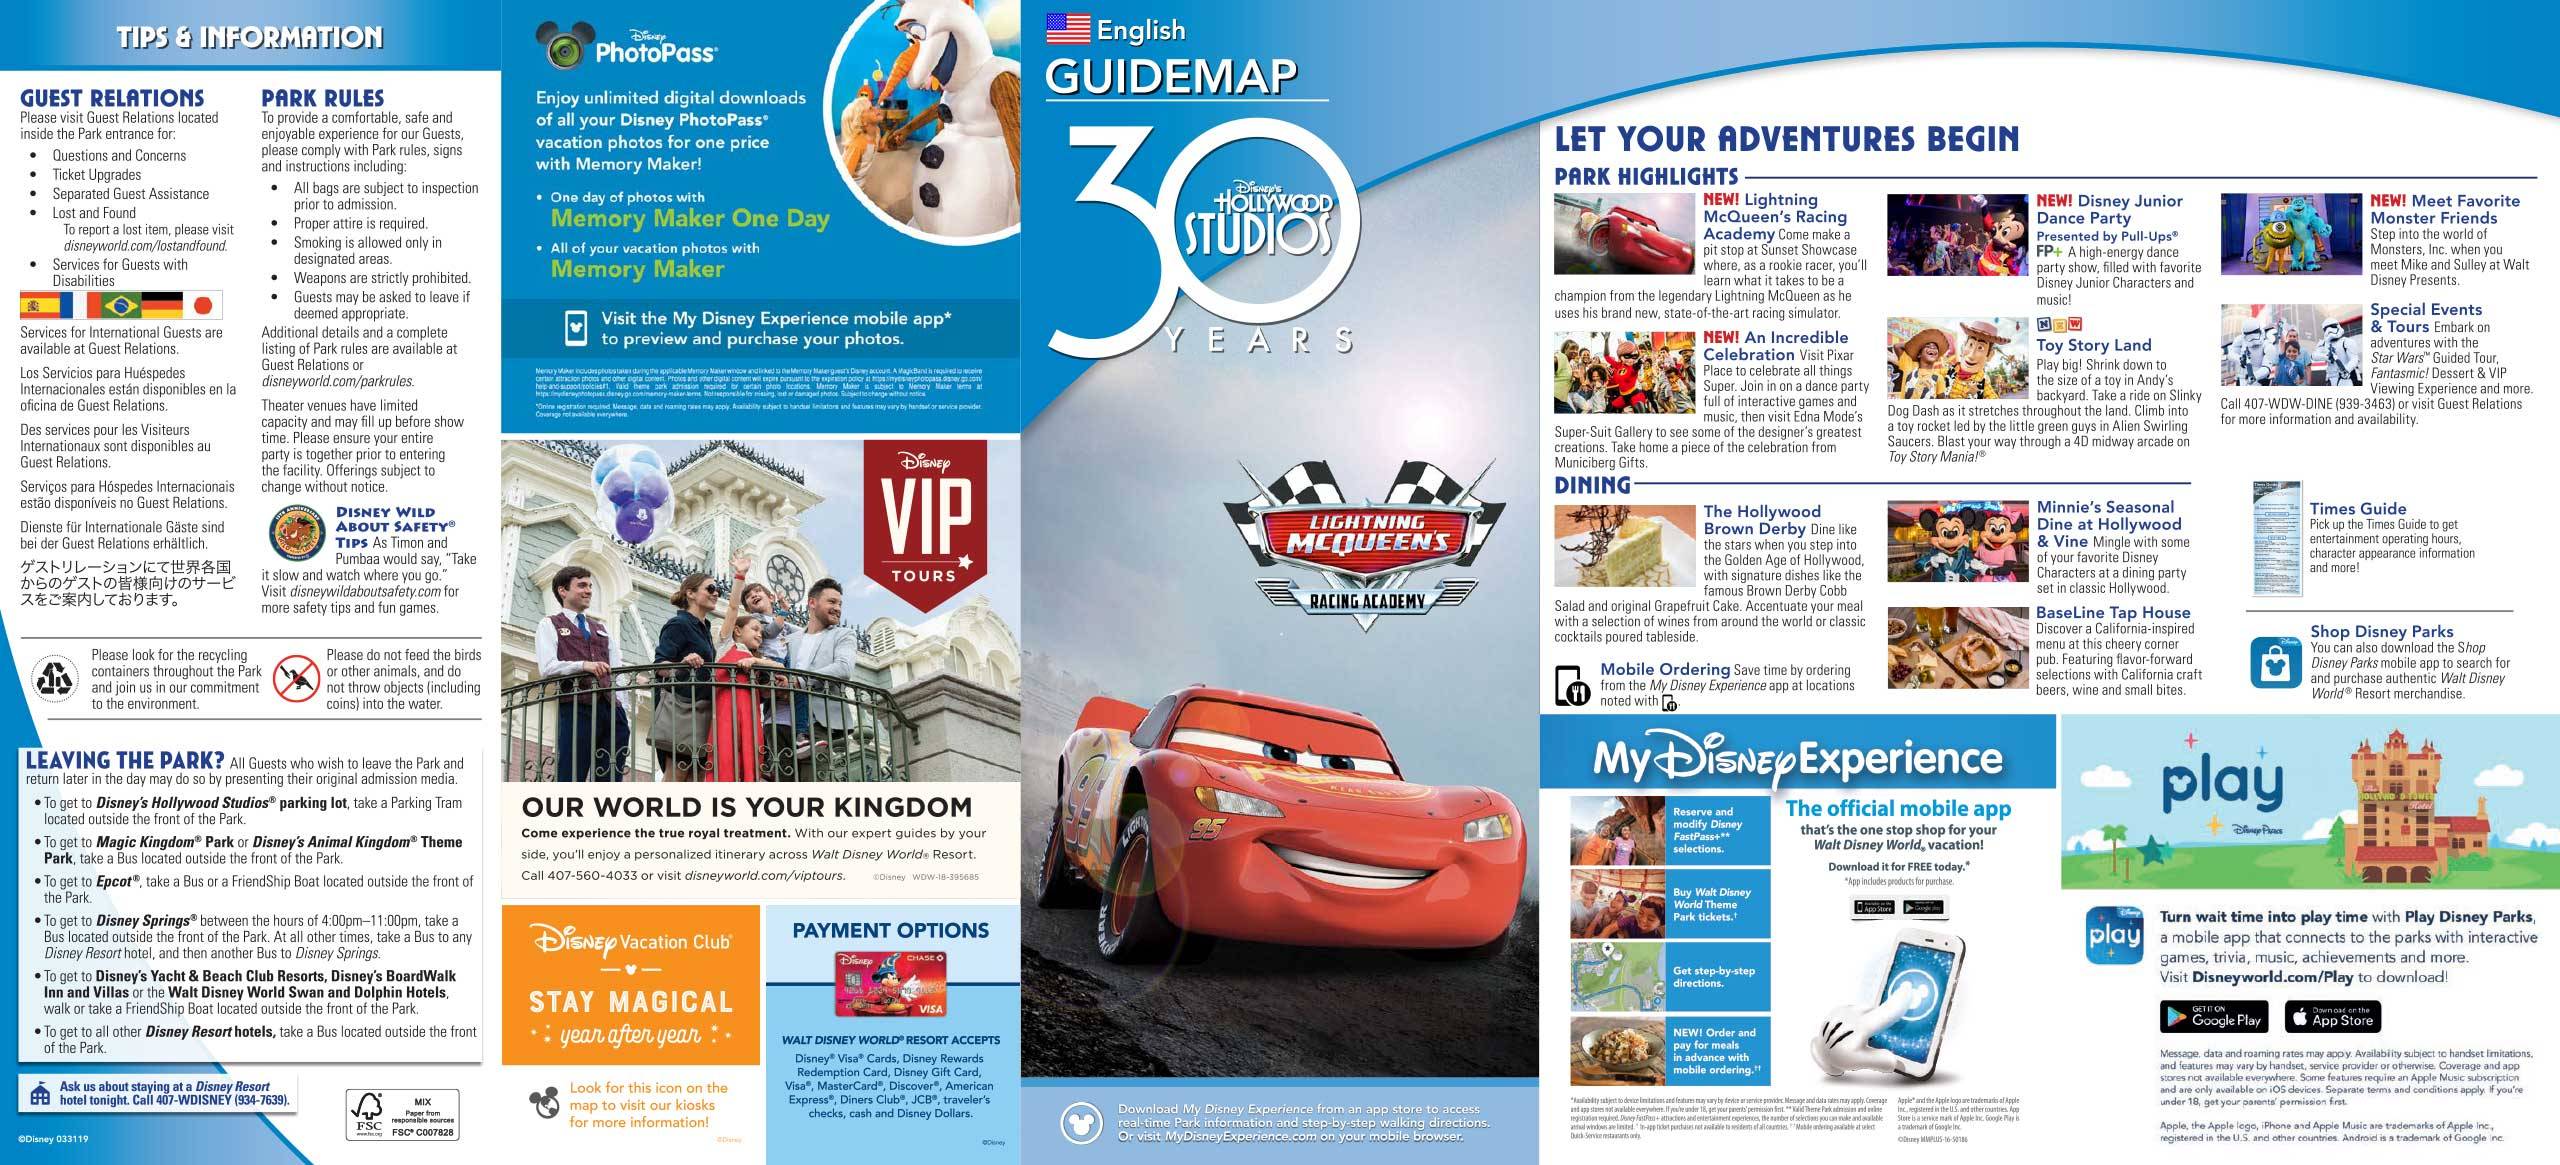 PHOTOS - New guide map for Disney's Hollywood Studios includes Lighting McQueen's Racing Academy and 30th Anniversary